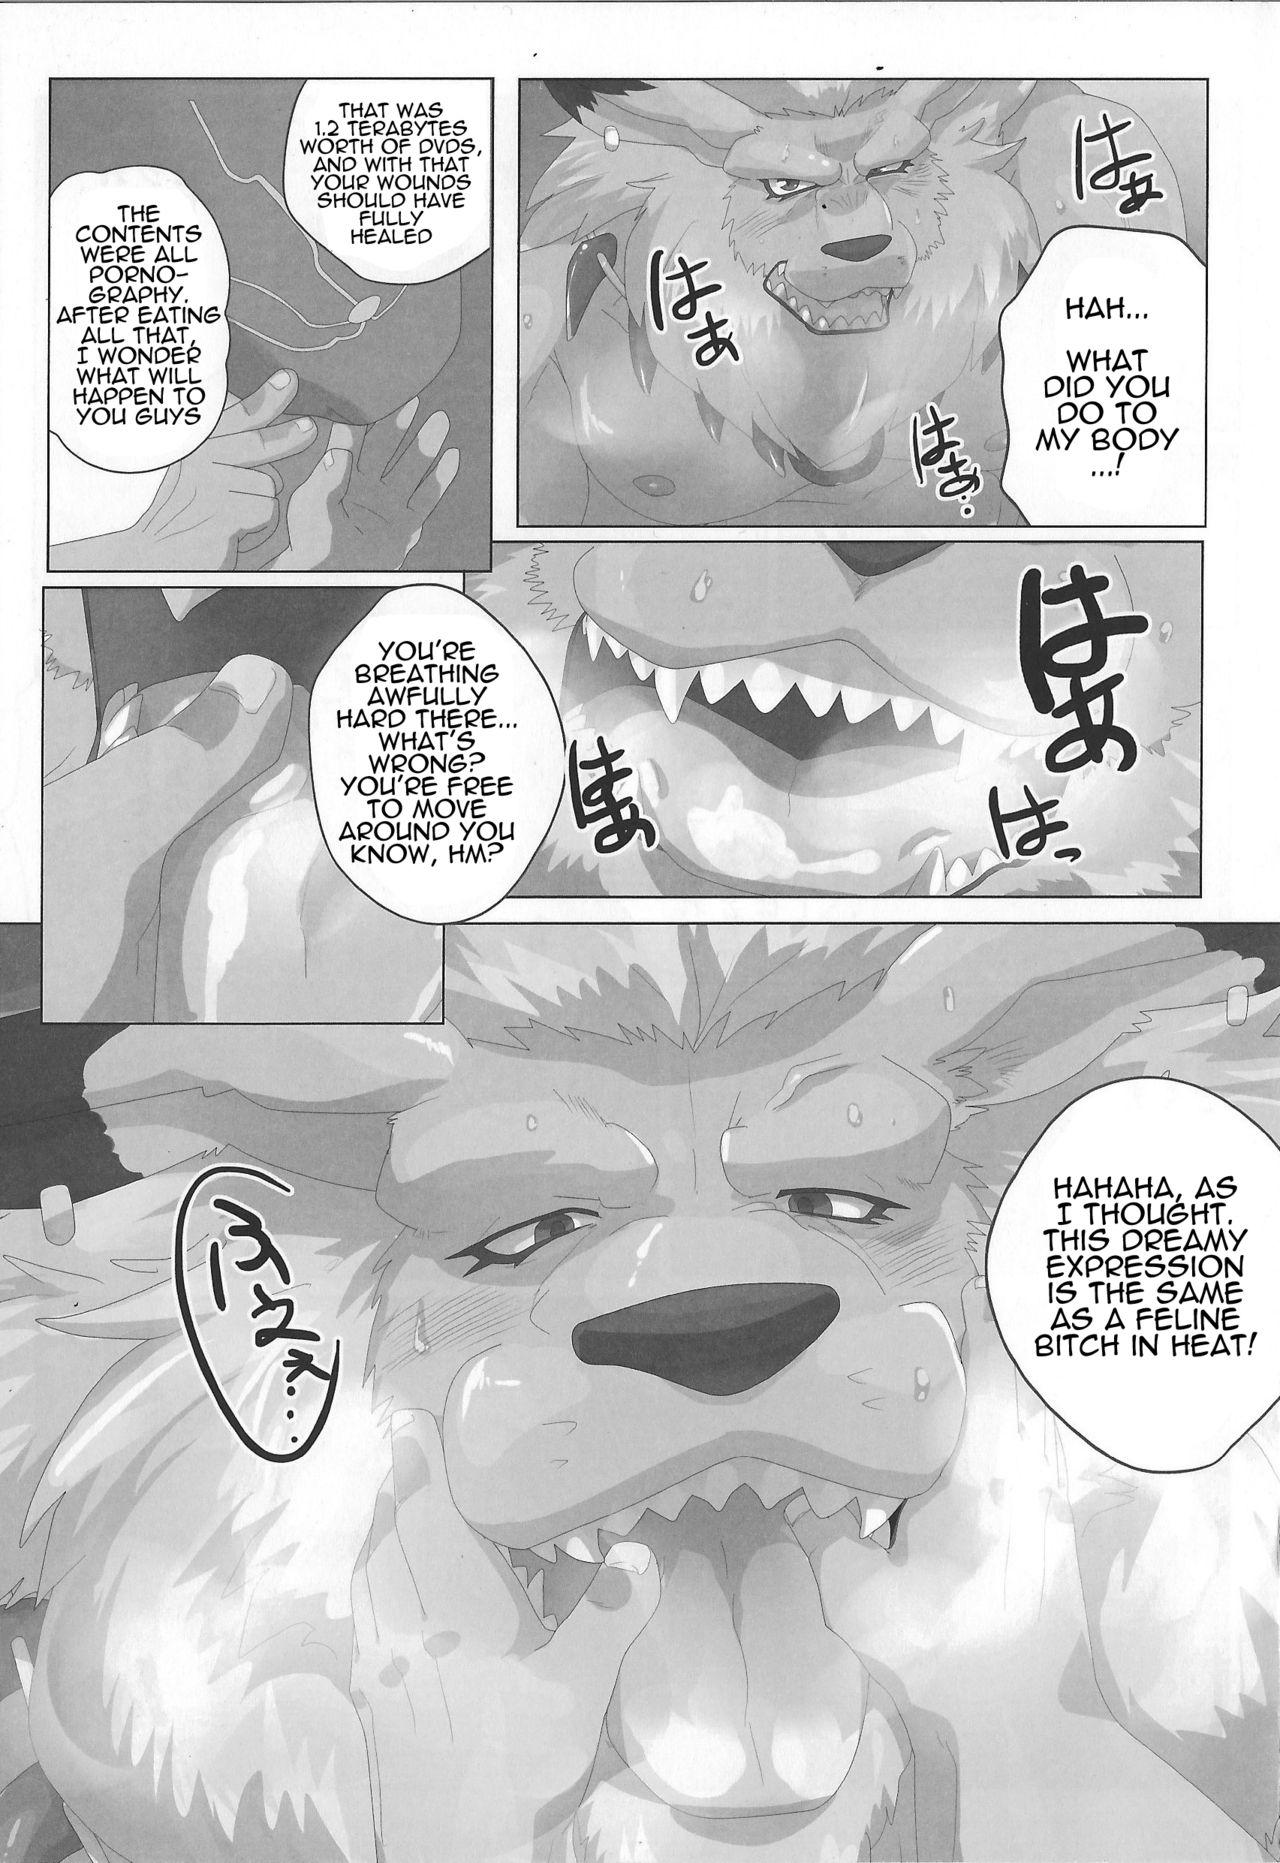 Family Taboo [Debirobu] For the Lion-Man Type Electric Life Form to Overturn Fate - Leomon Doujin [ENG] - Digimon Gay Facial - Page 9